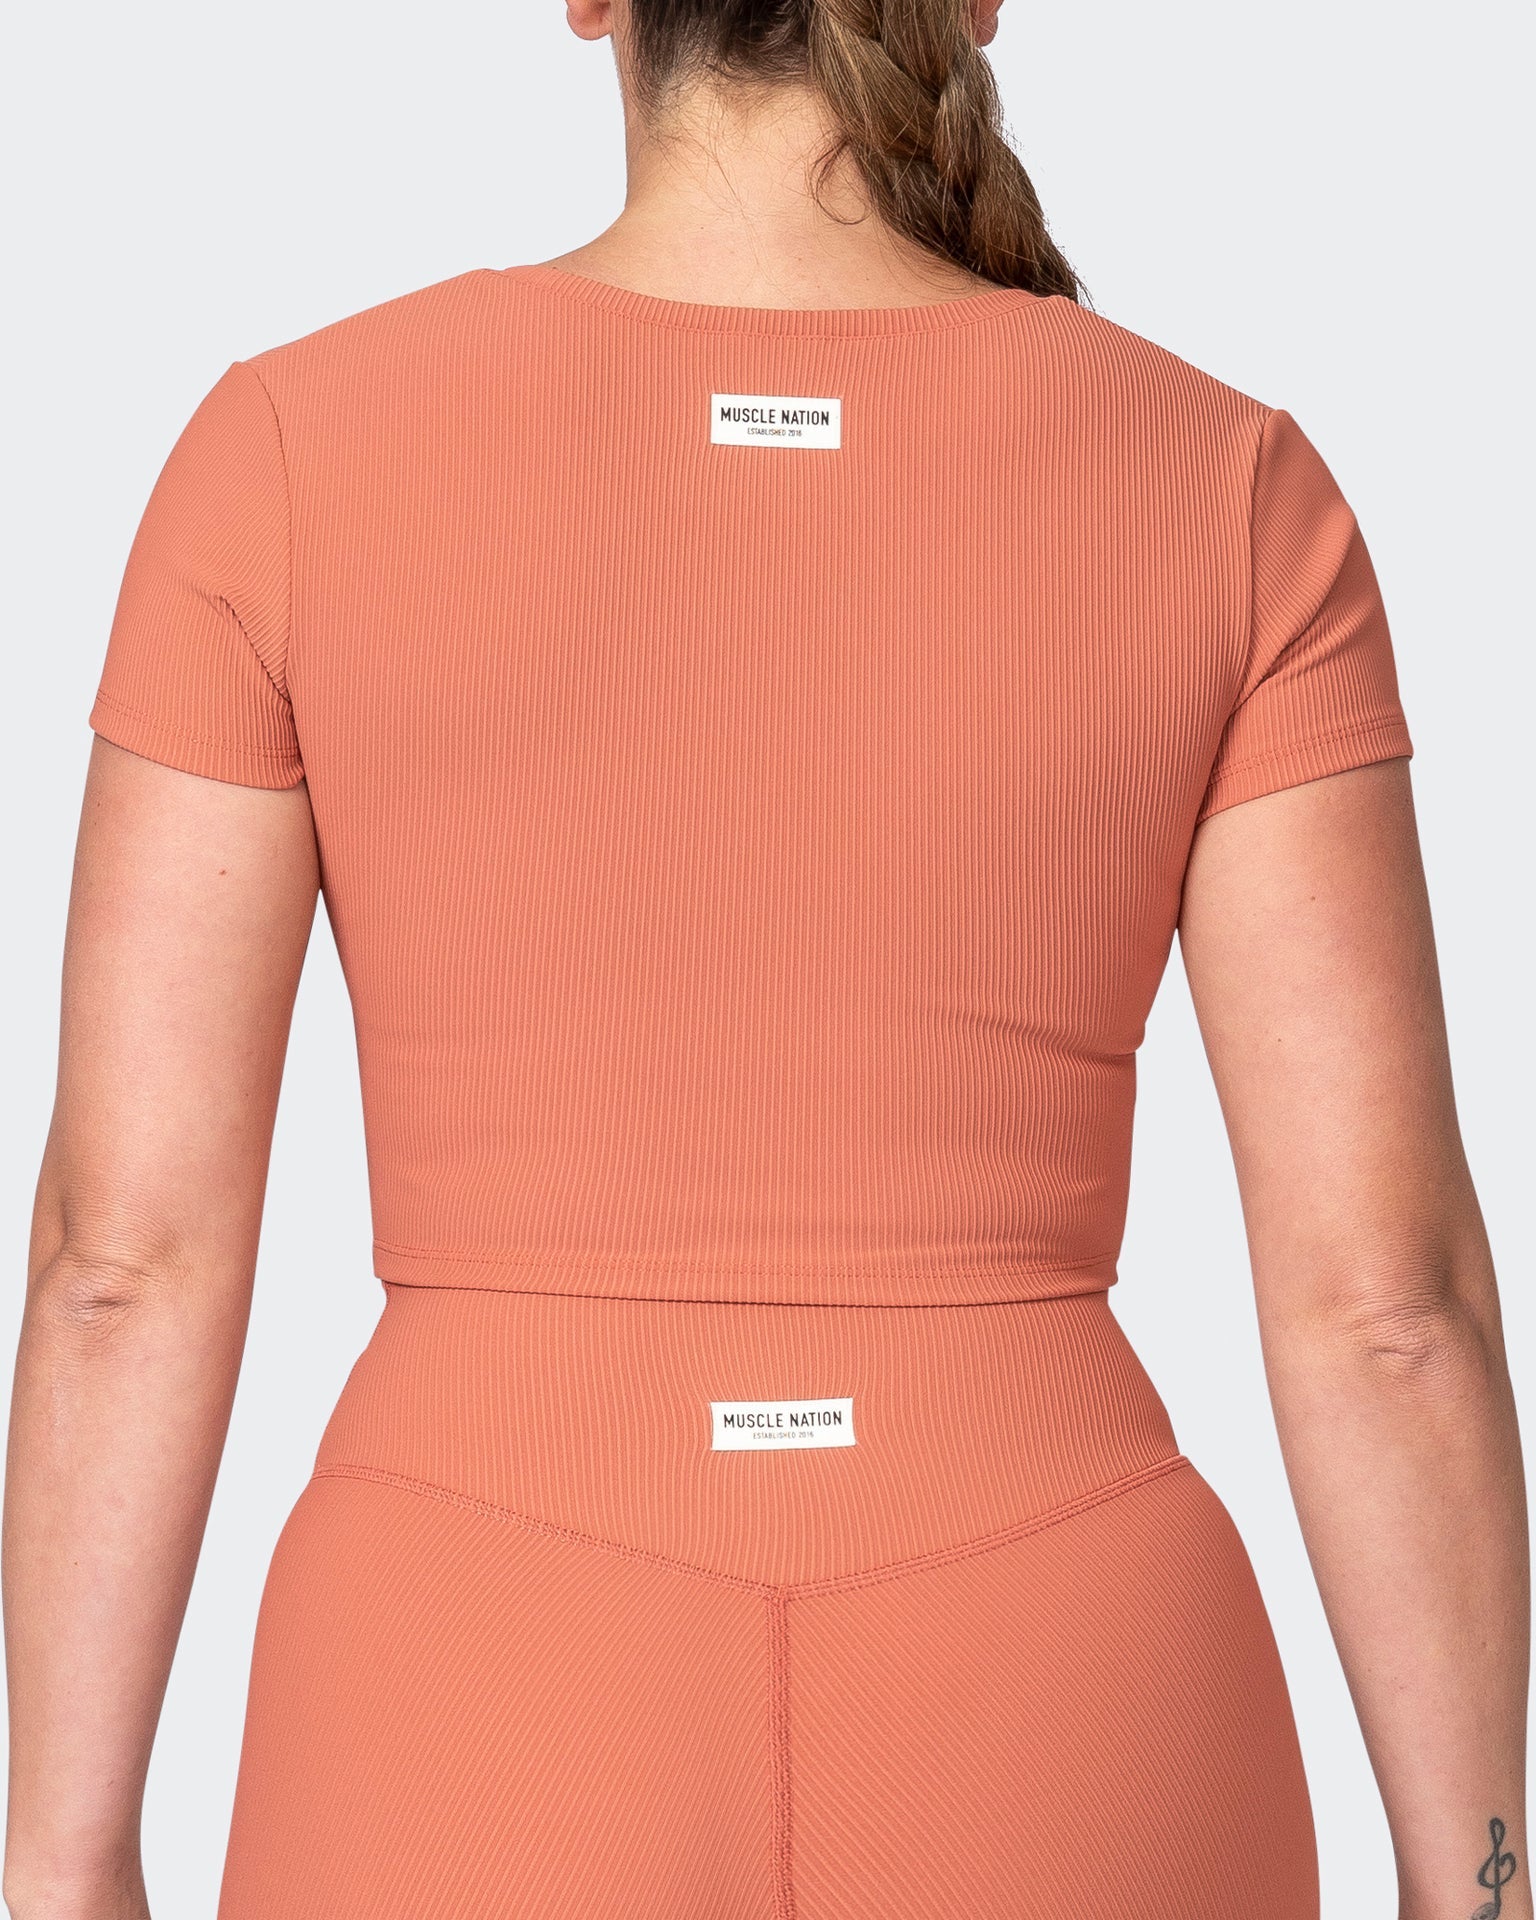 musclenation T-Shirts Rival Cropped Rib Top - Burnt Sienna